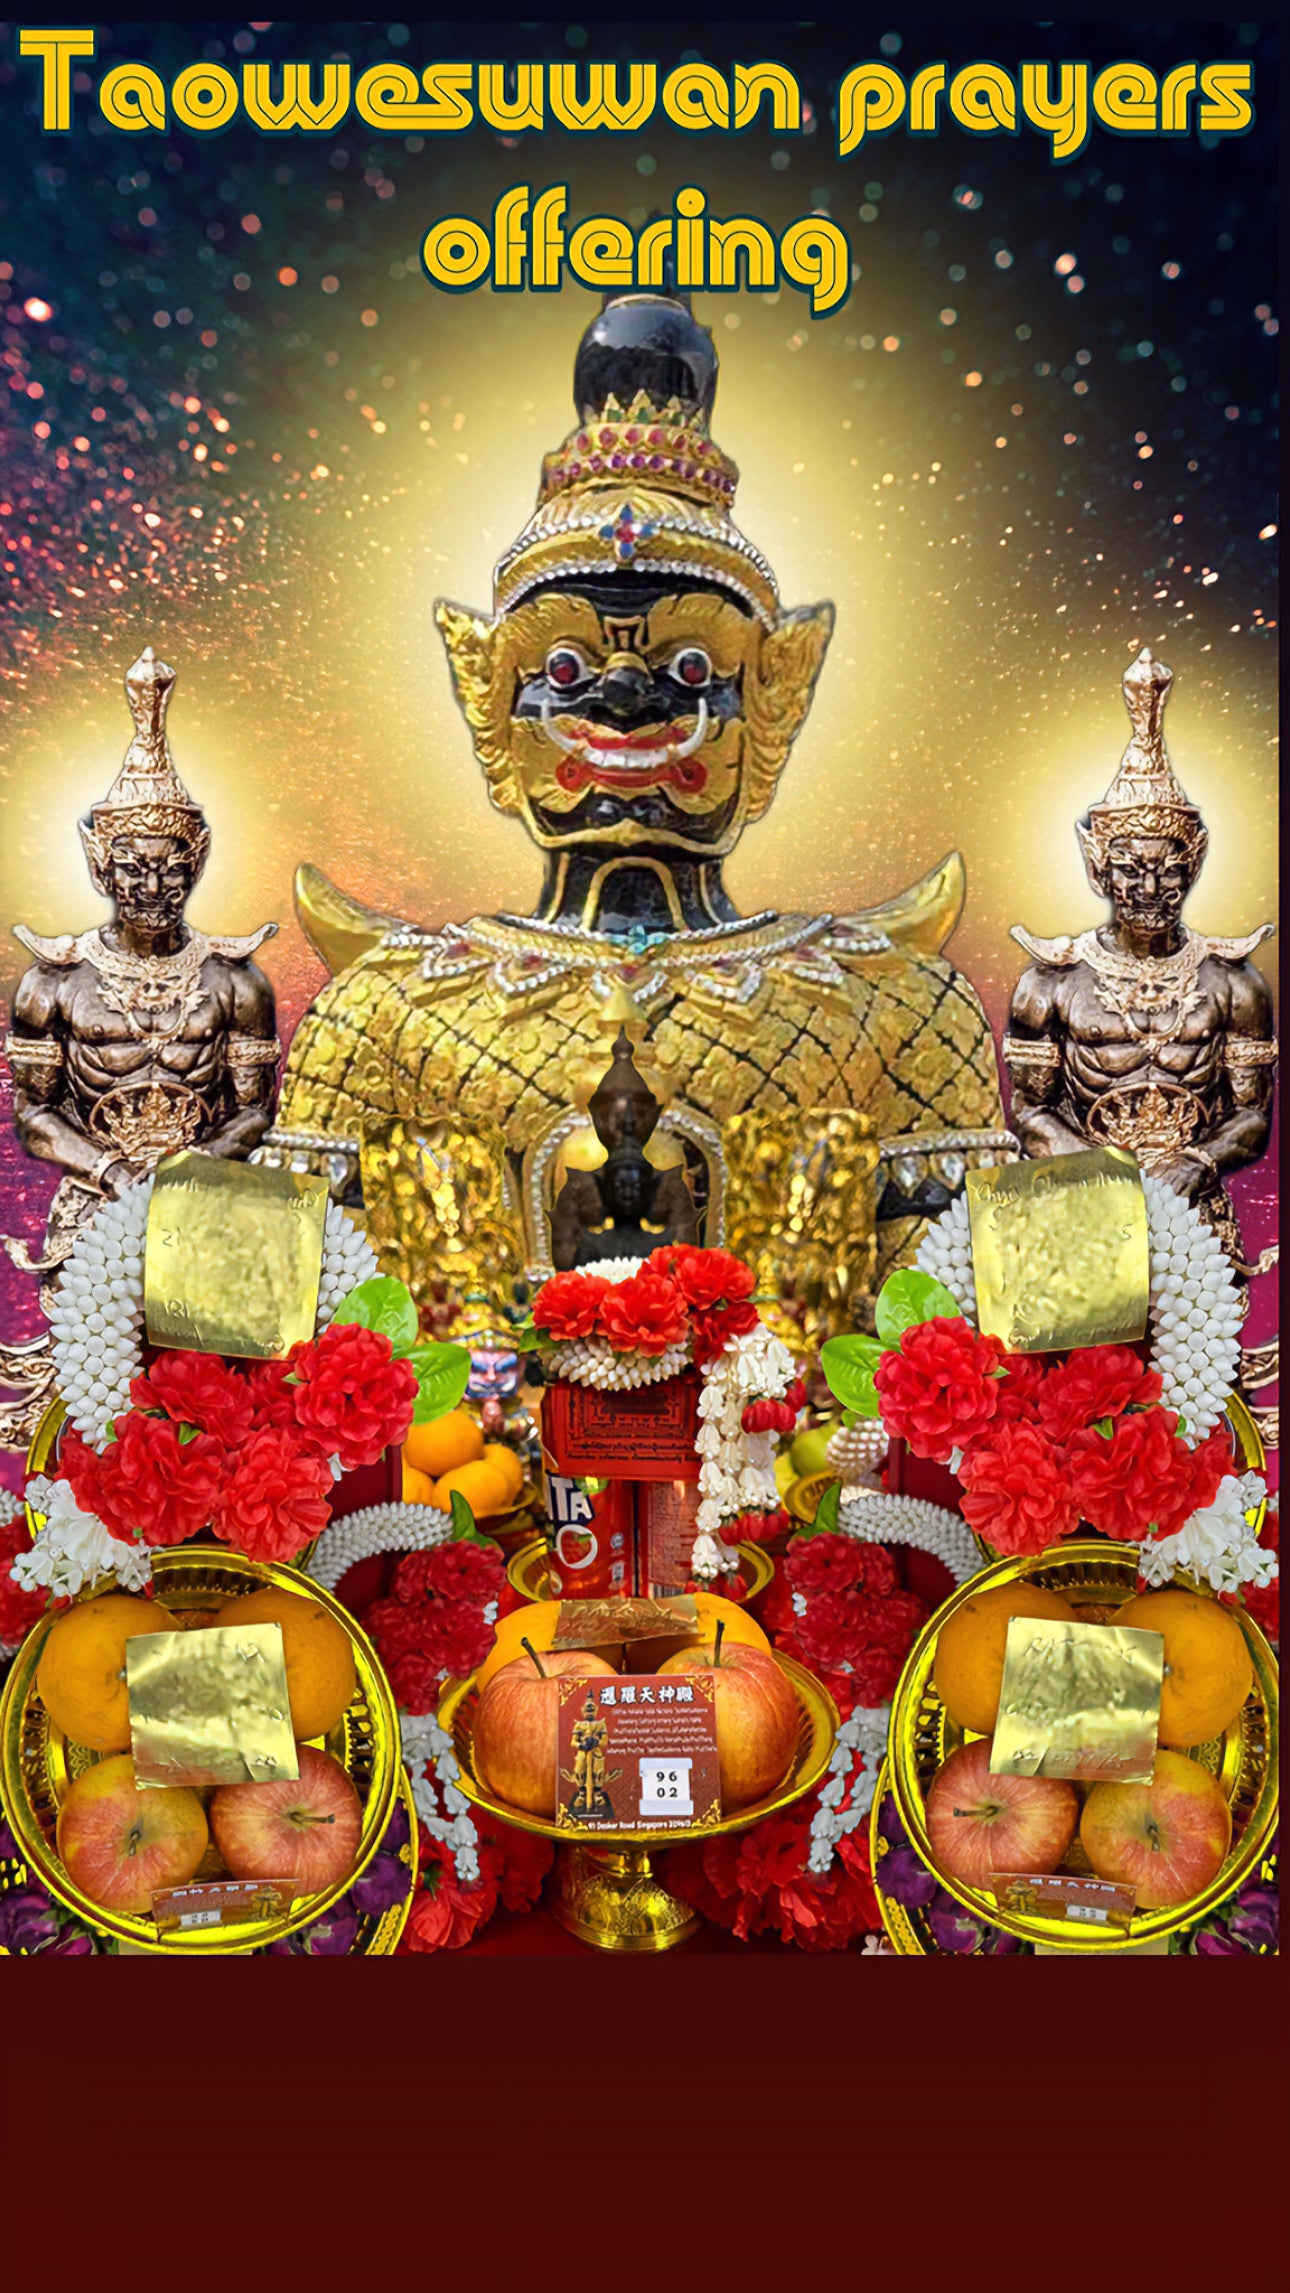 Experience the powerful blessings of Prayers On Behalf, Taowesuwan of 91 Desker Road. Renowned for its ability to fulfill wishes, express gratitude, and provide protection. Unlock the potential of these prayers and invite positivity into your life.